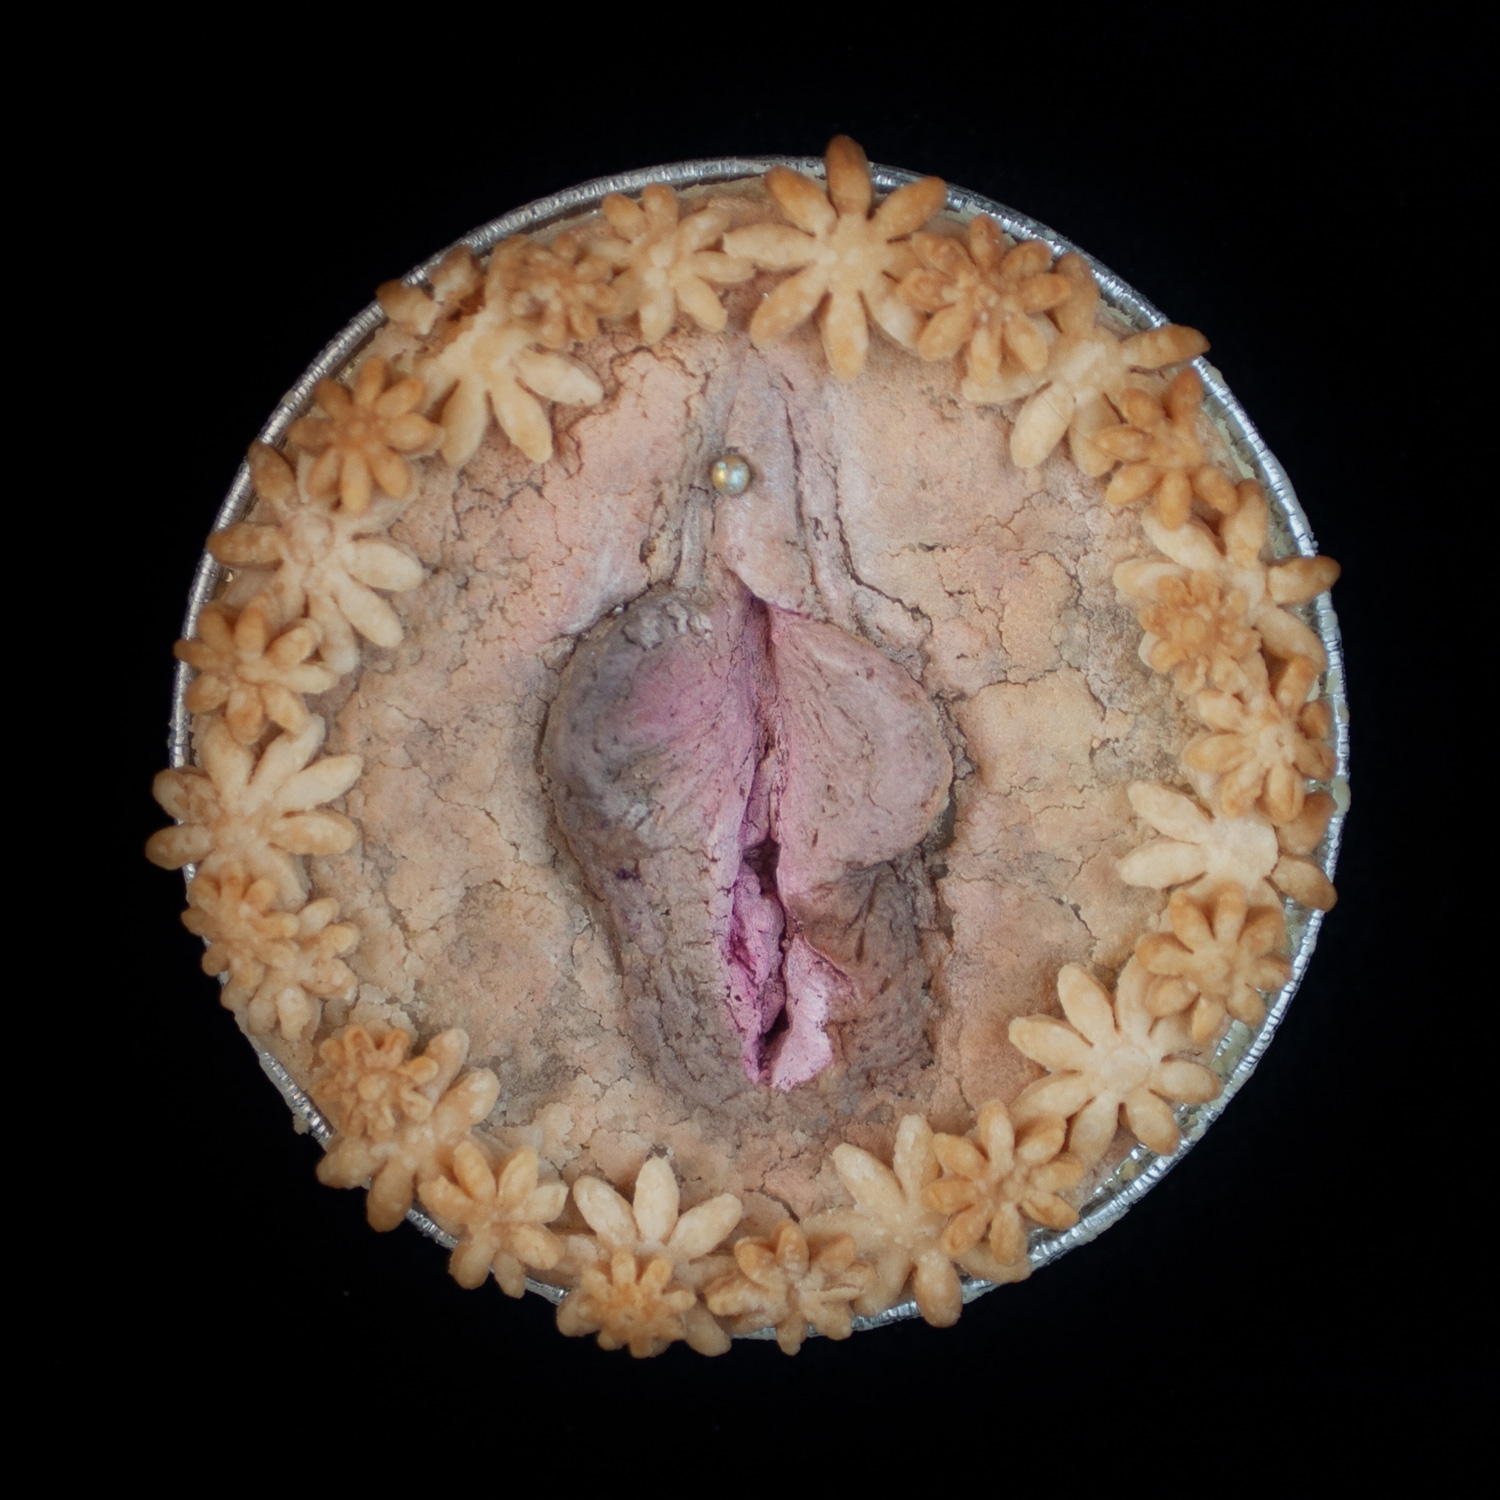 Baked pie on black background, the pie is decorated with pie crust flowers and a pie crust vulva made in a very realist fashion. 